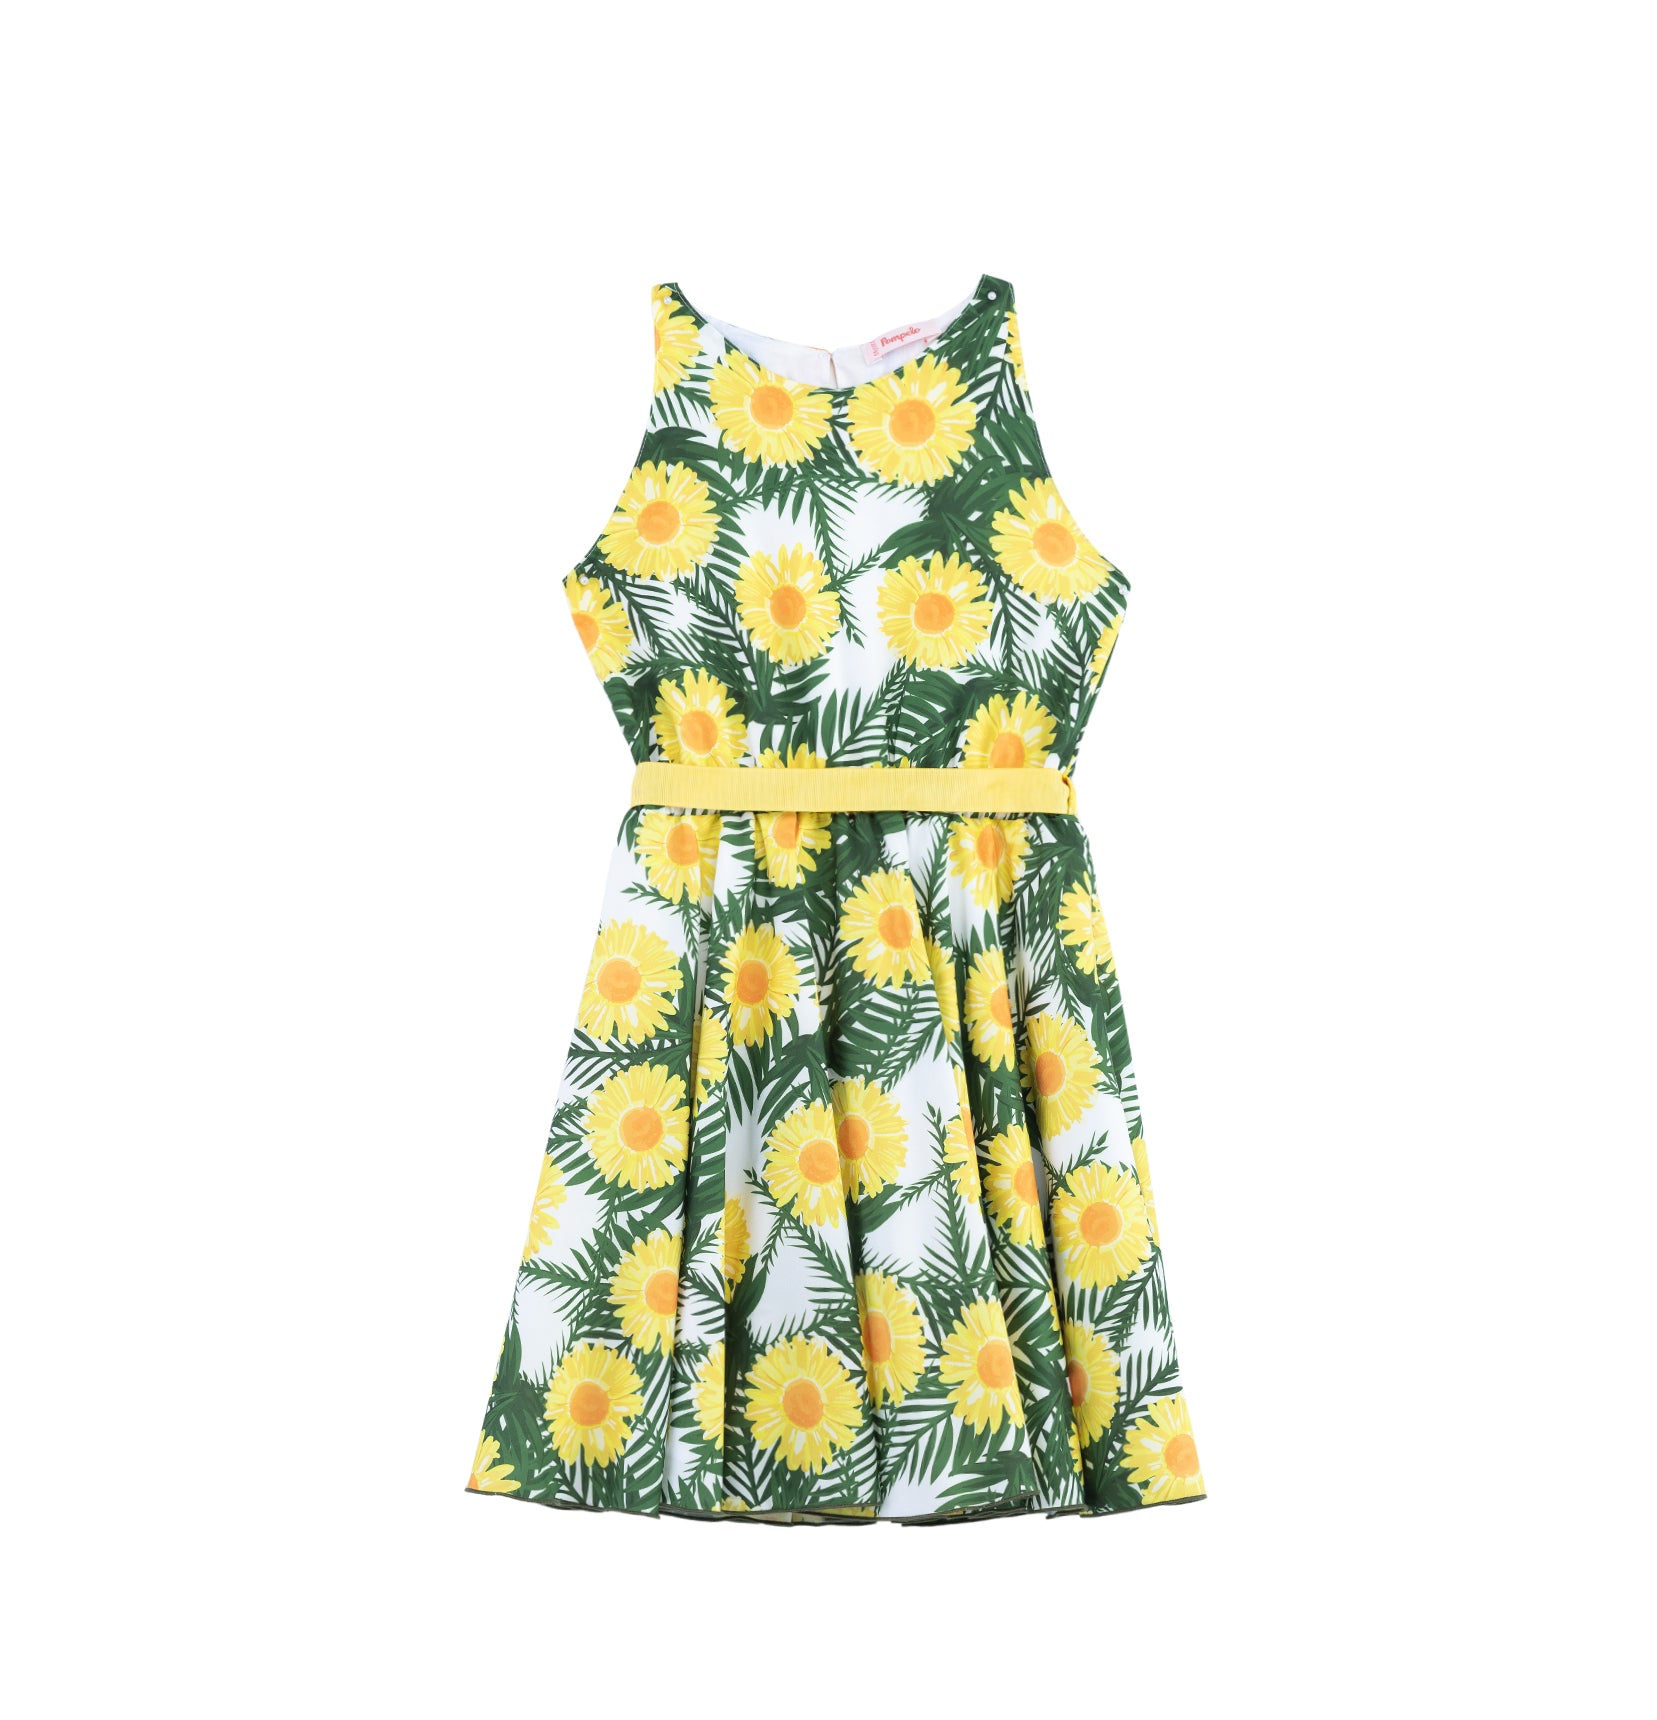 Sunflower patterned sleeveless dress with yellow ribbon by Pompelo